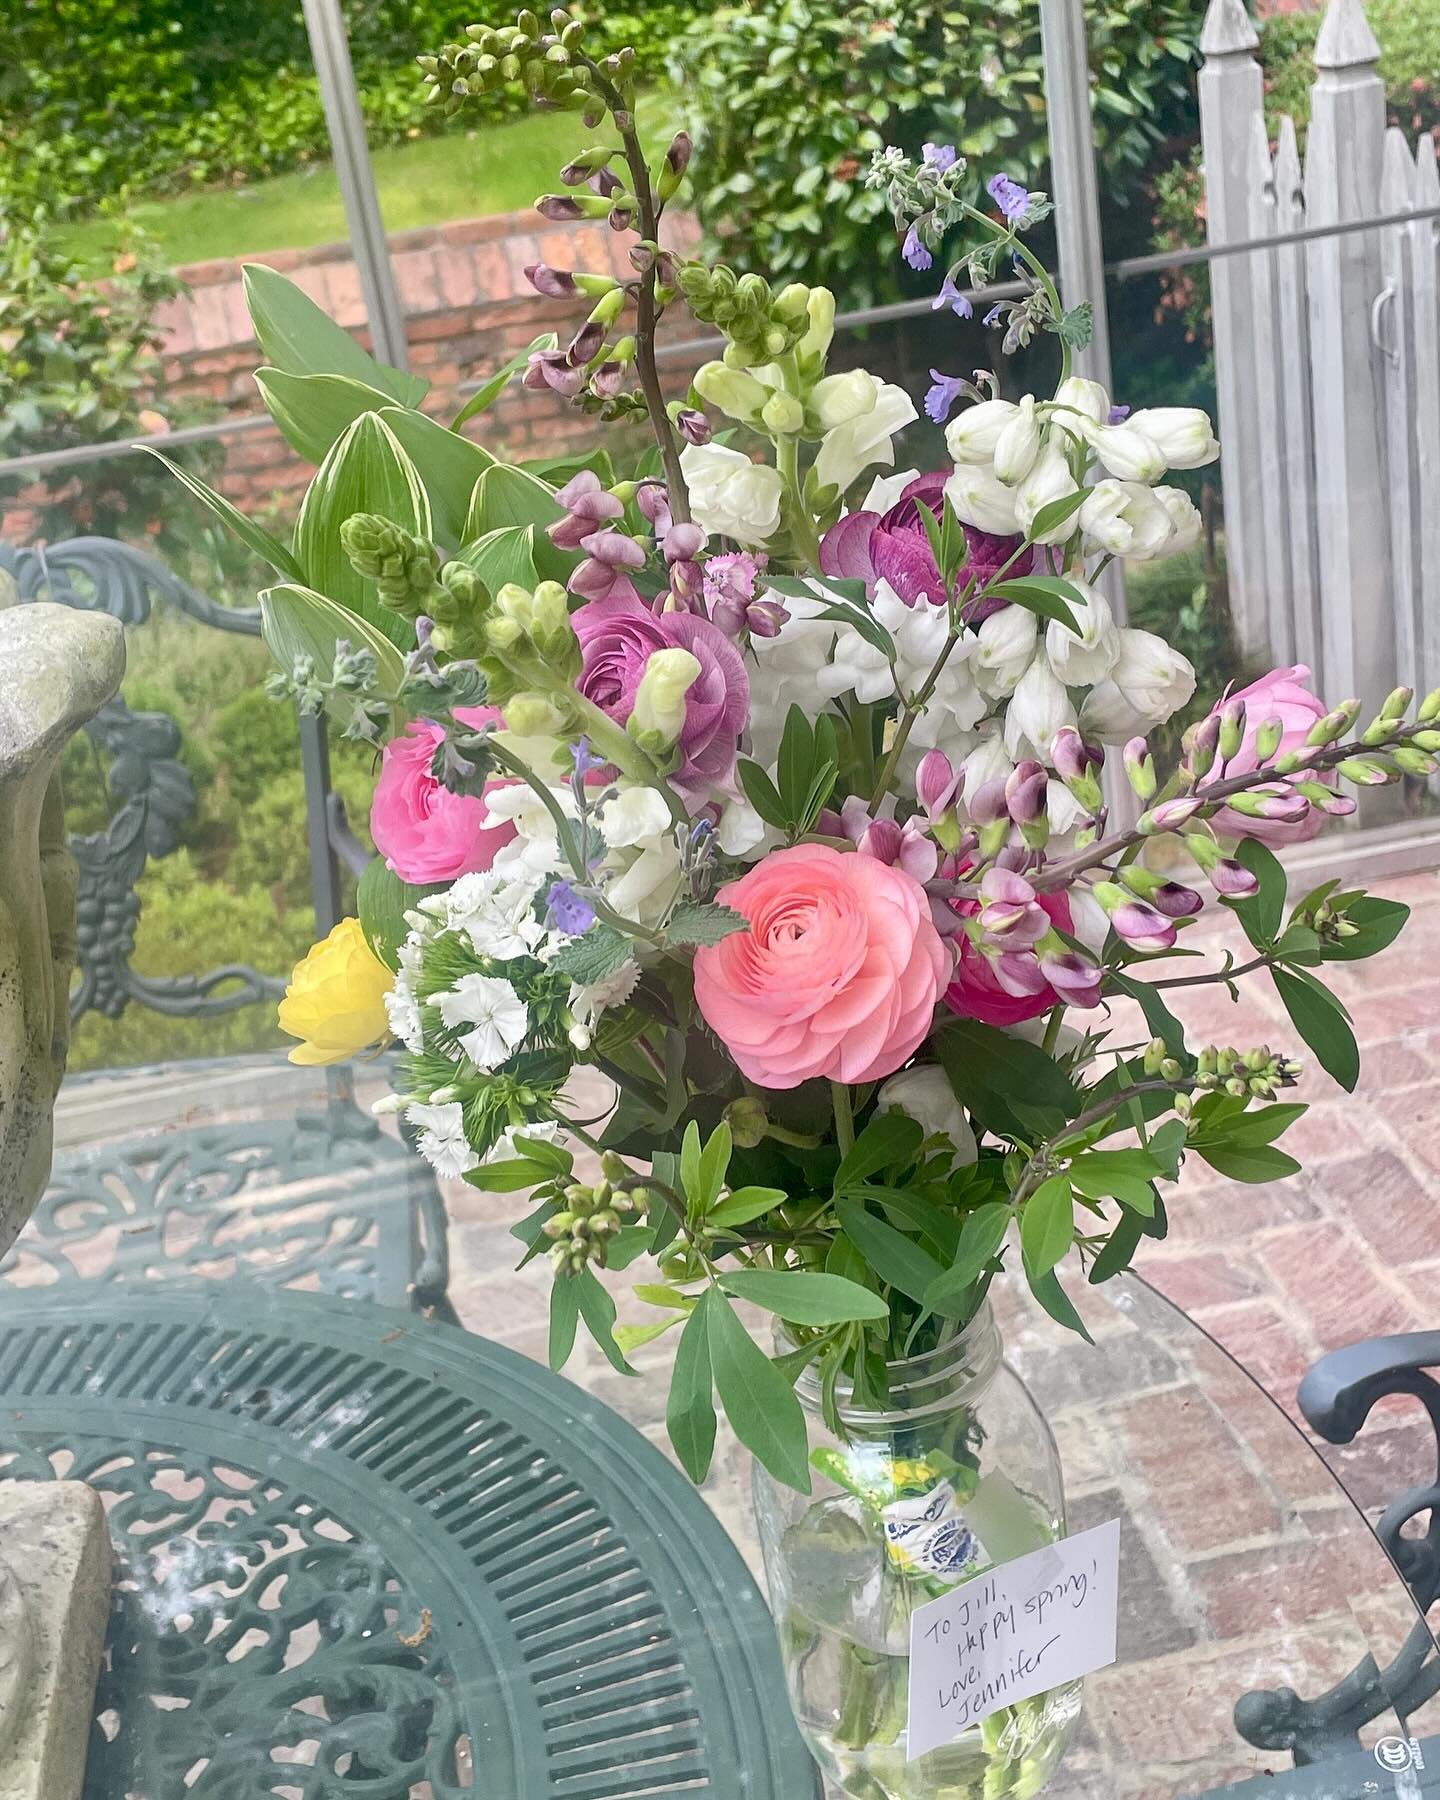 Bouquet Subscriptions have started and it brings me so much joy! I feel like a little garden fairy spreading happiness around the neighborhood in the morning.